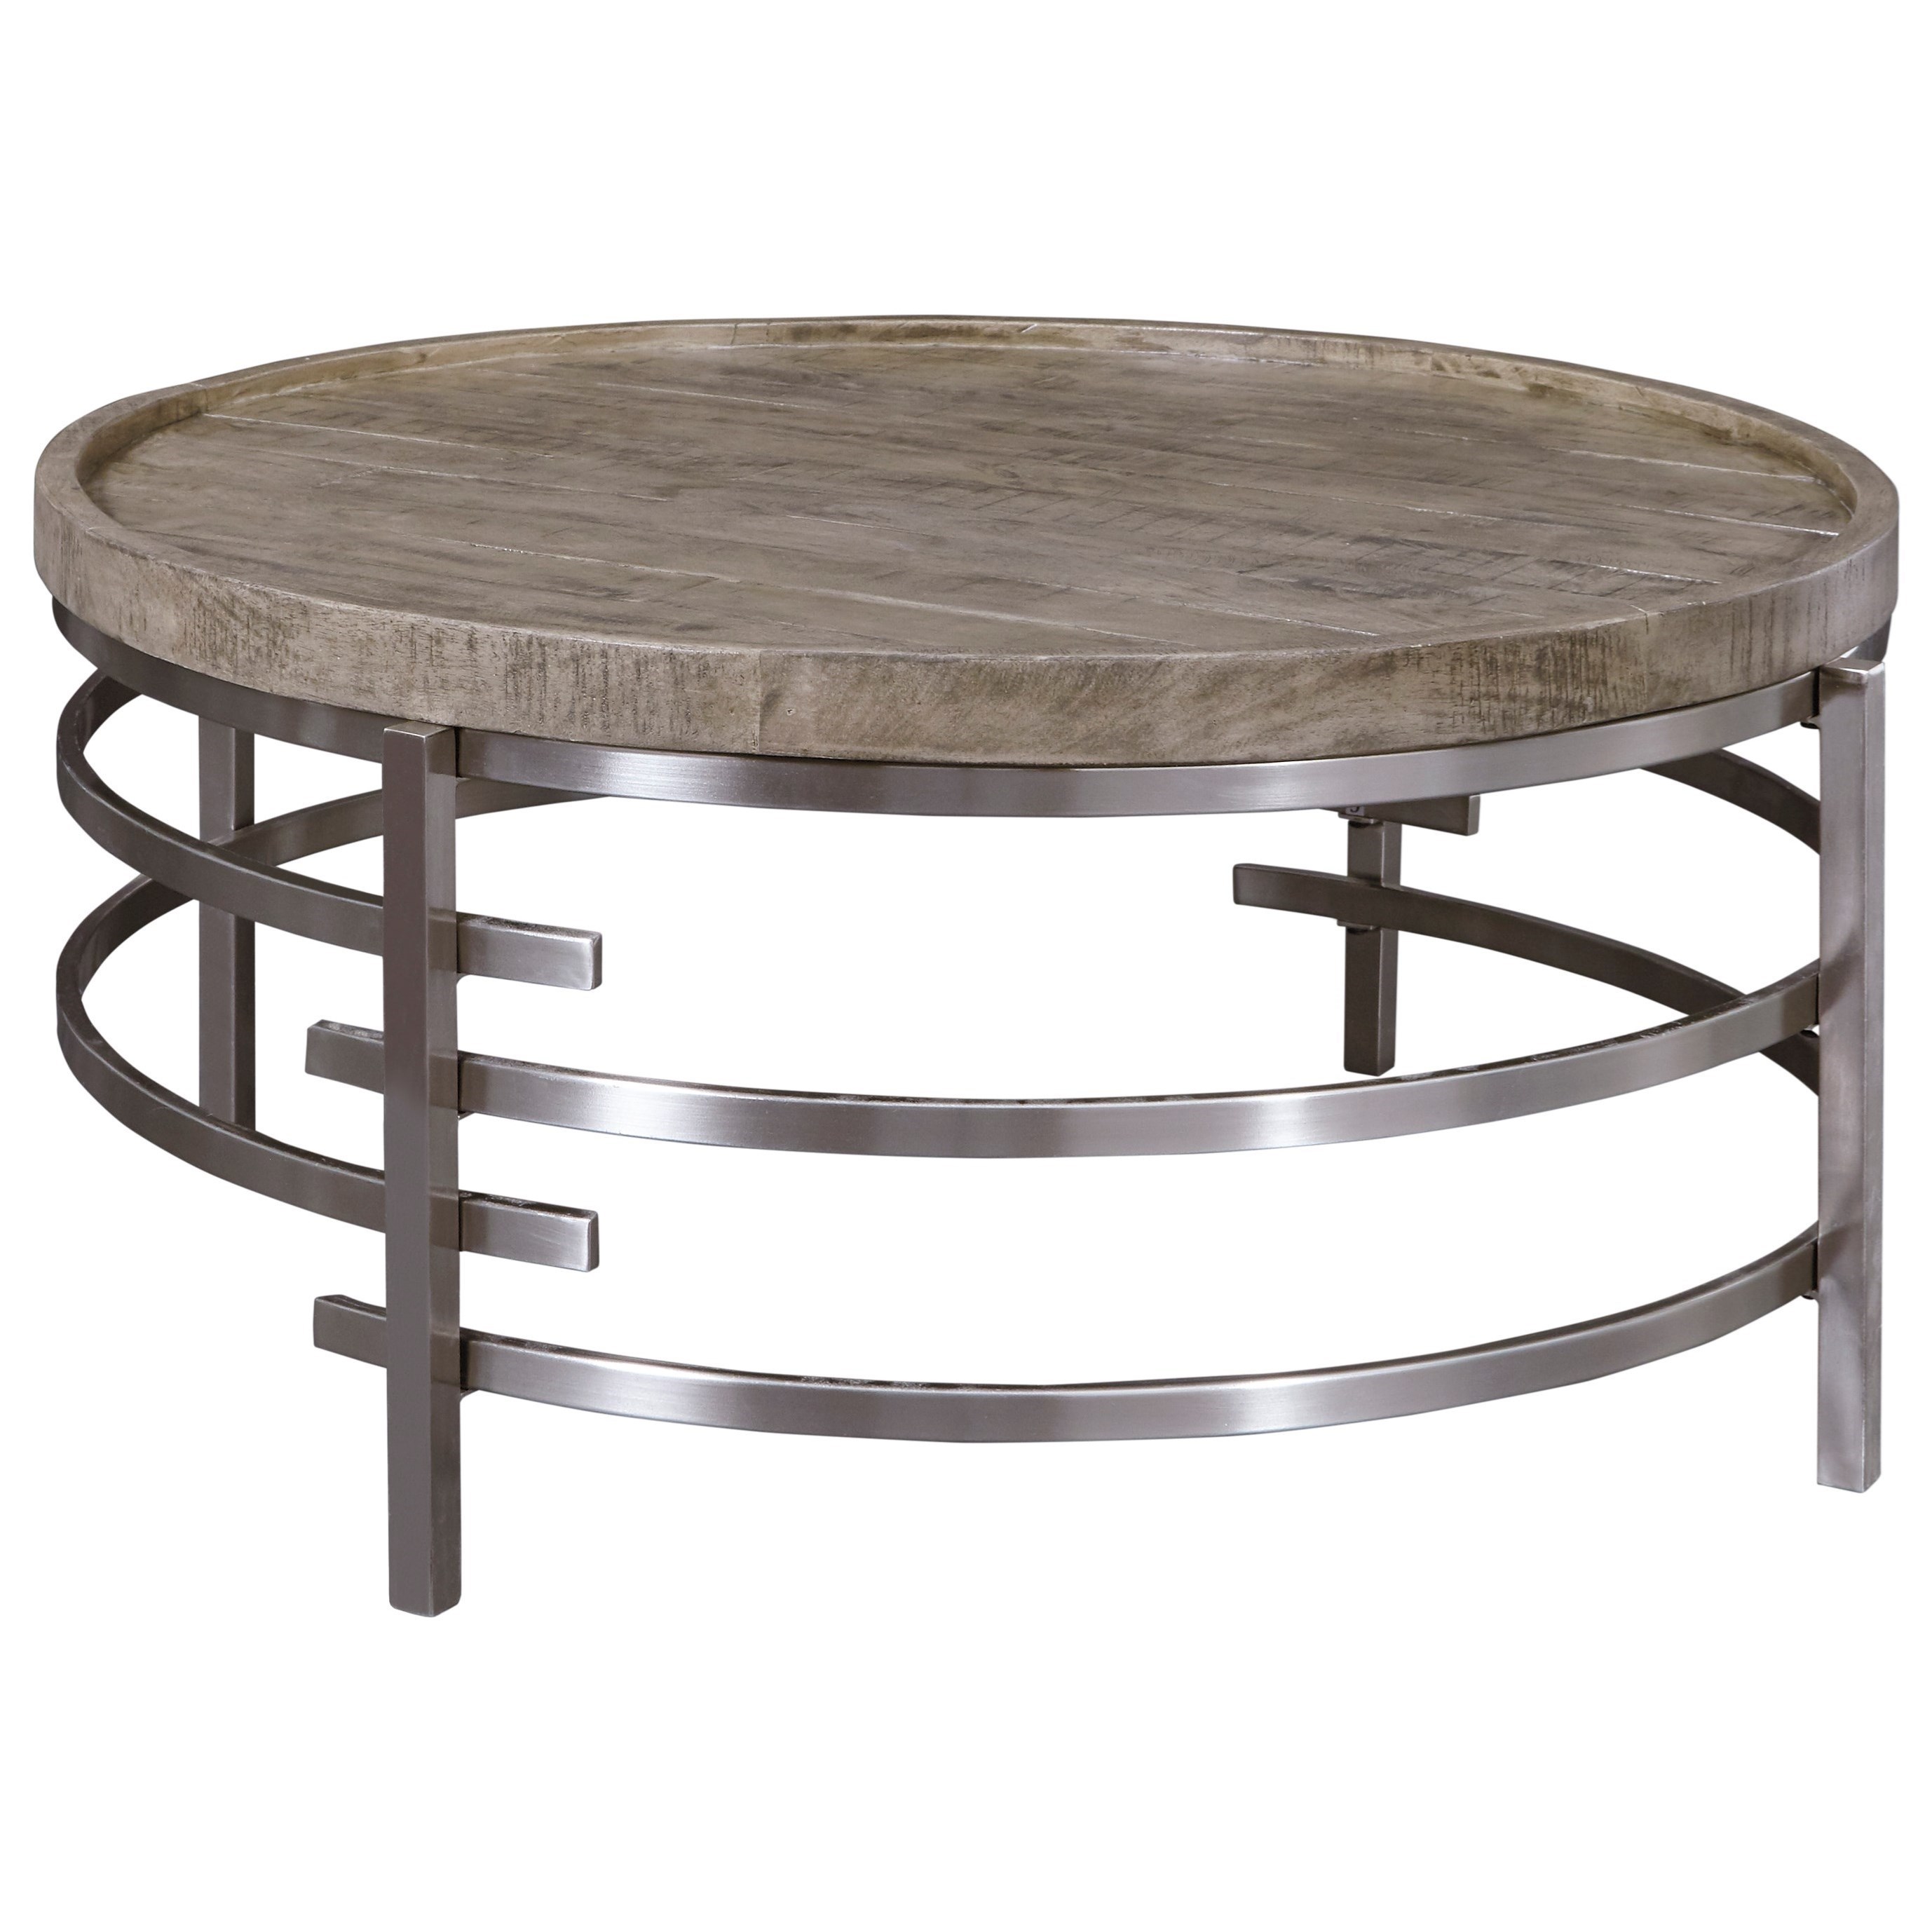 Signature Design by Ashley Zinelli T681-8 Round Cocktail Table 